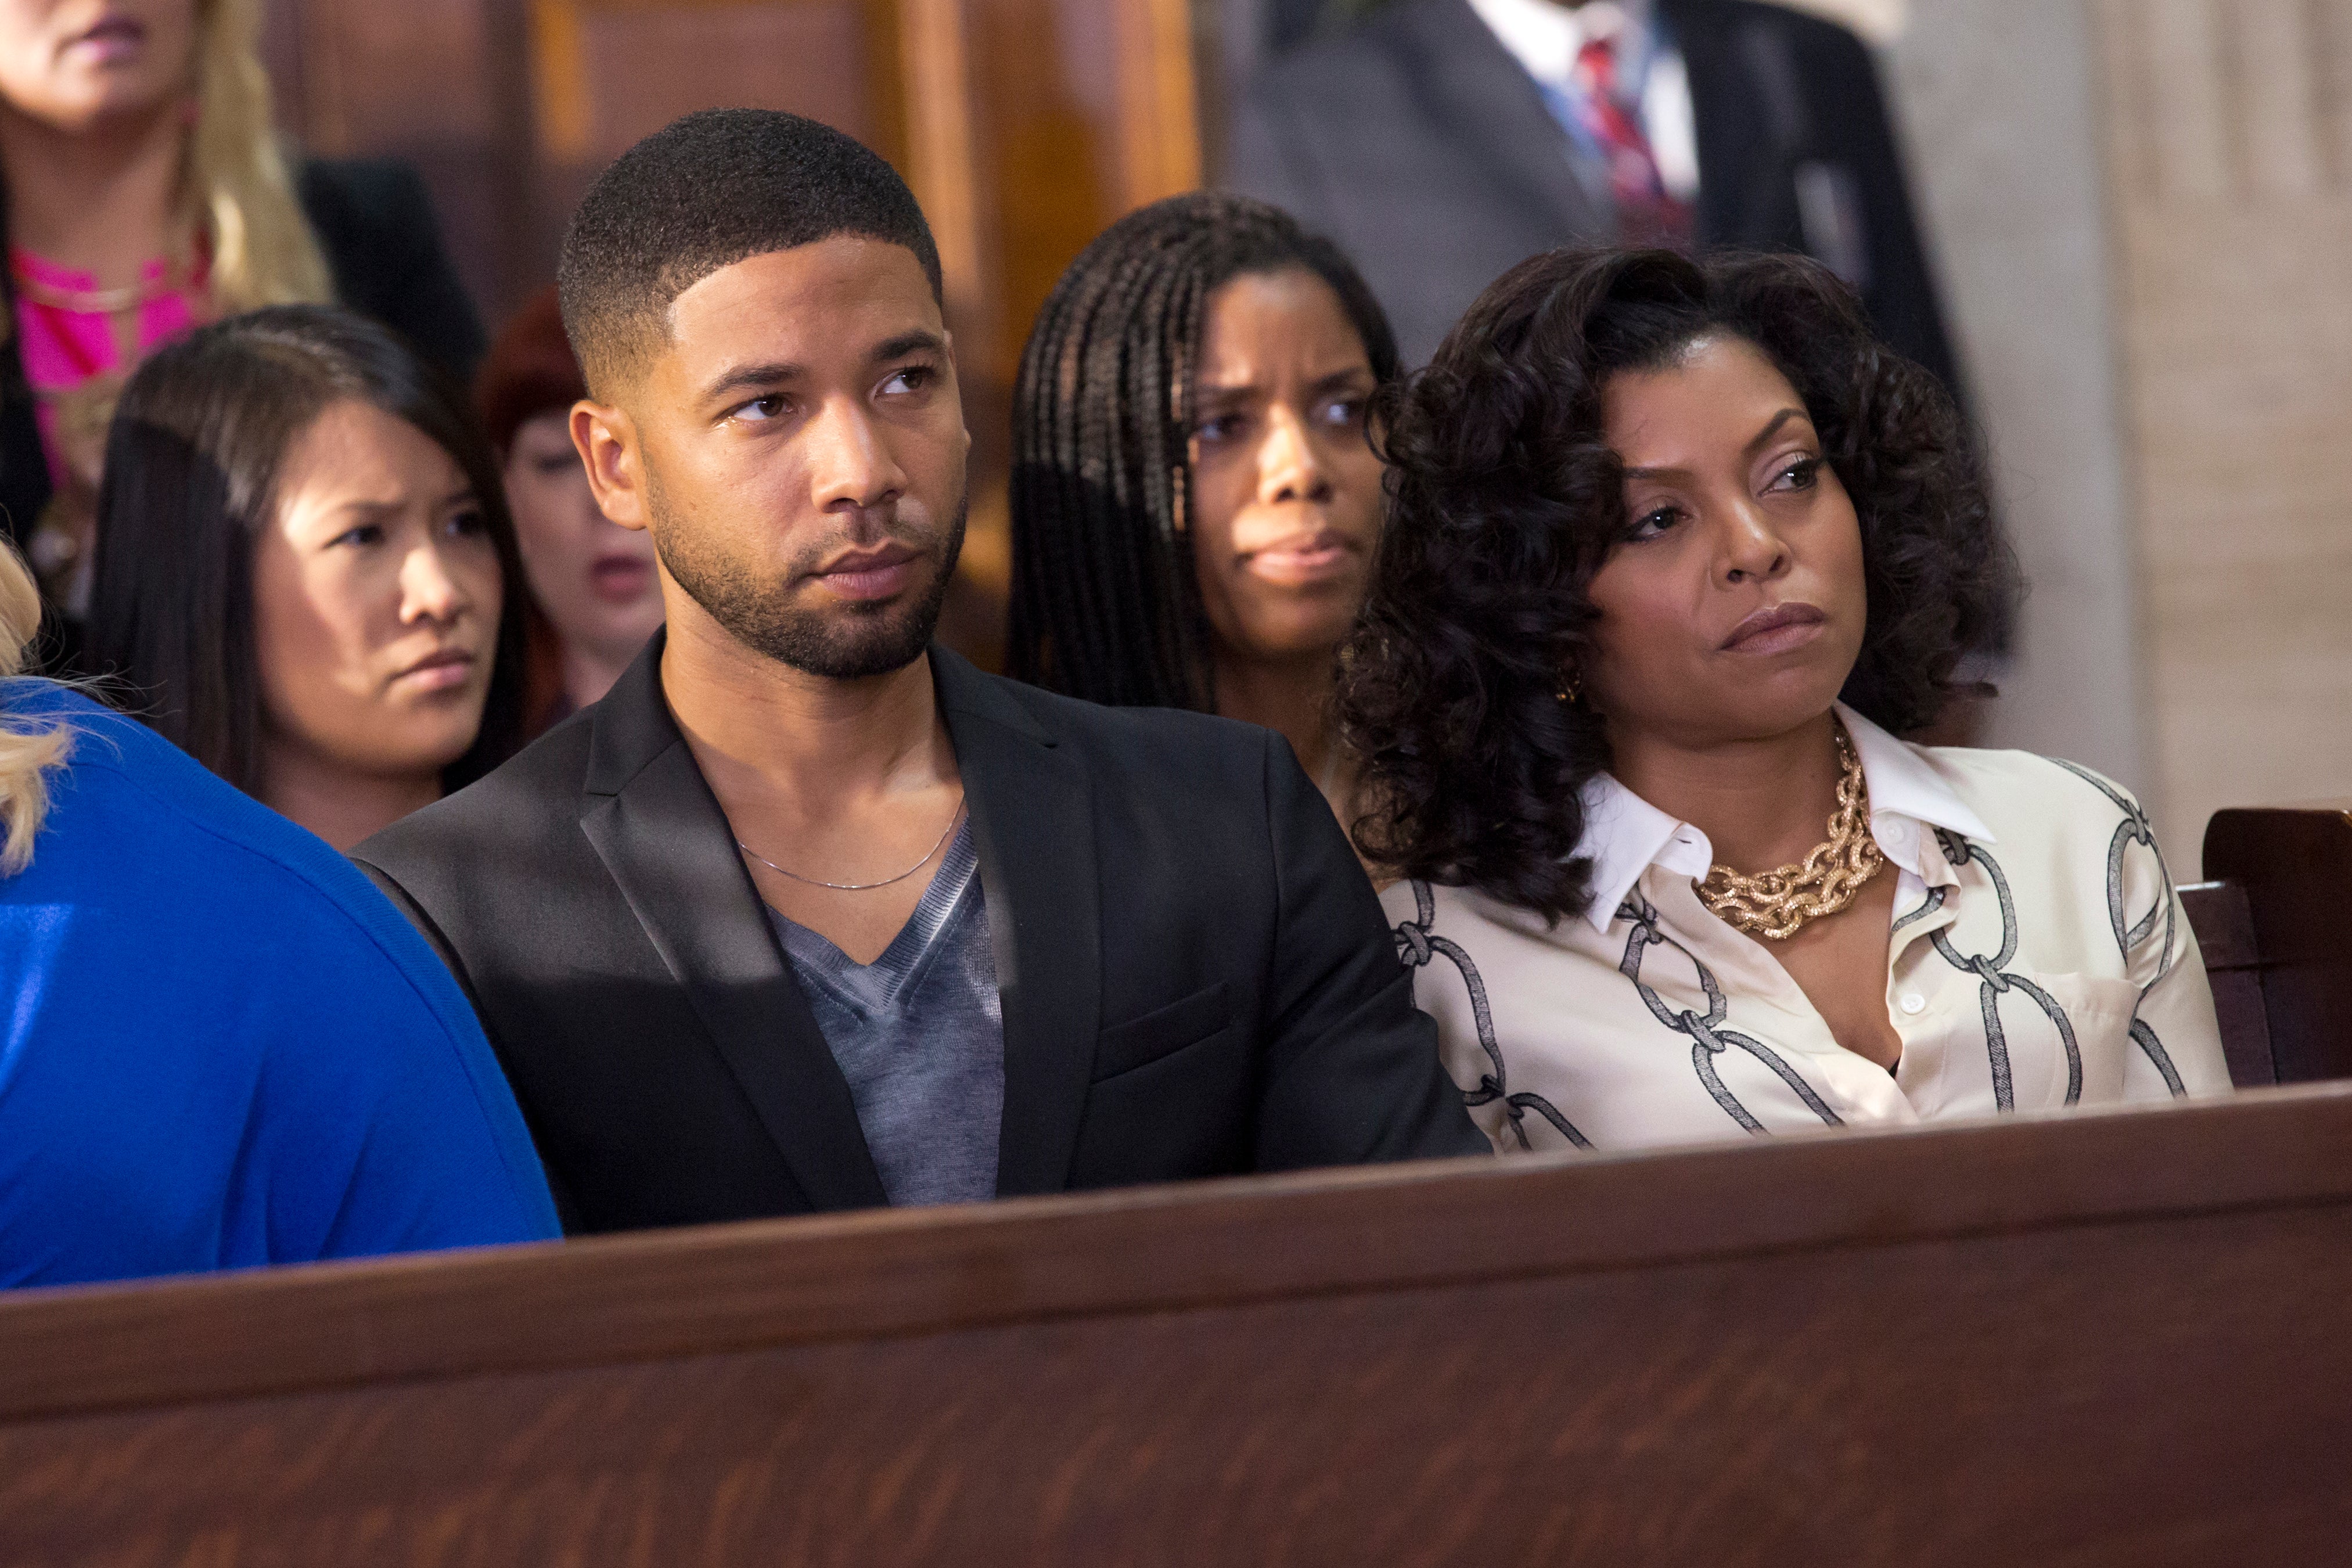 Get Your "Empire" Fix with a Sneak Peek of the Season 2 Premiere (You're Welcome!)
